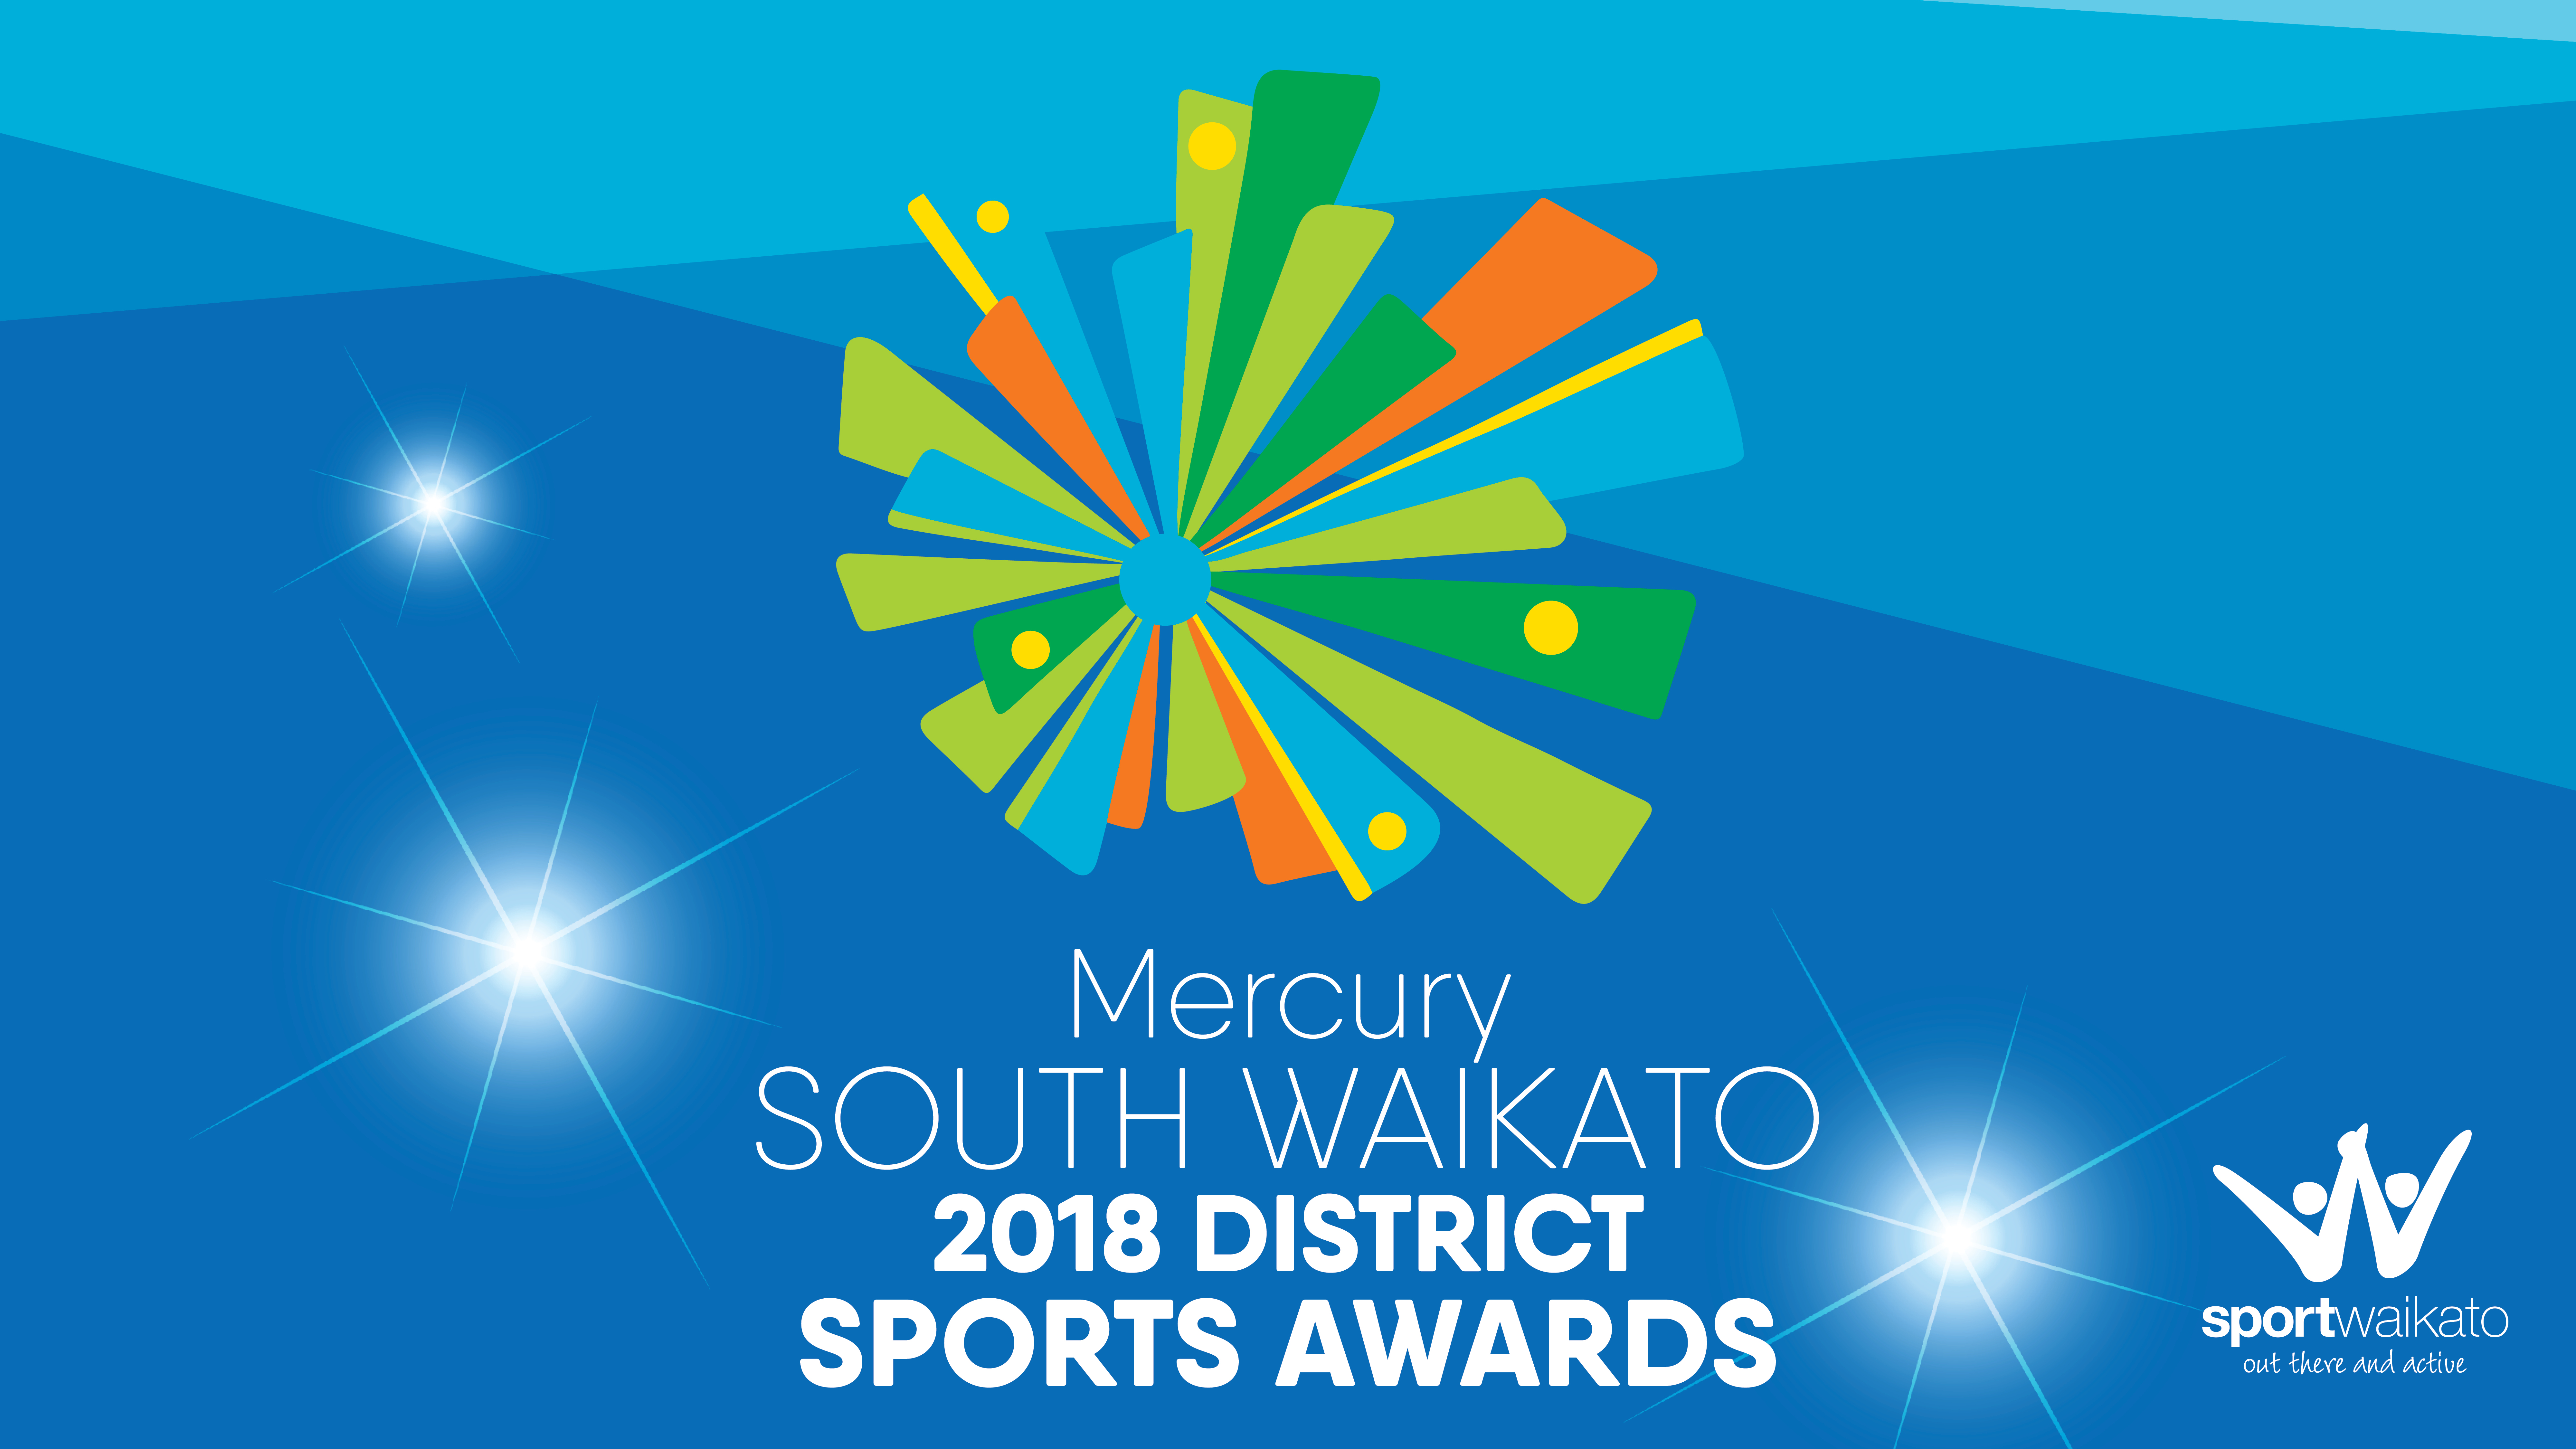 2018 Mercury South Waikato District Sports Awards nominees announced!